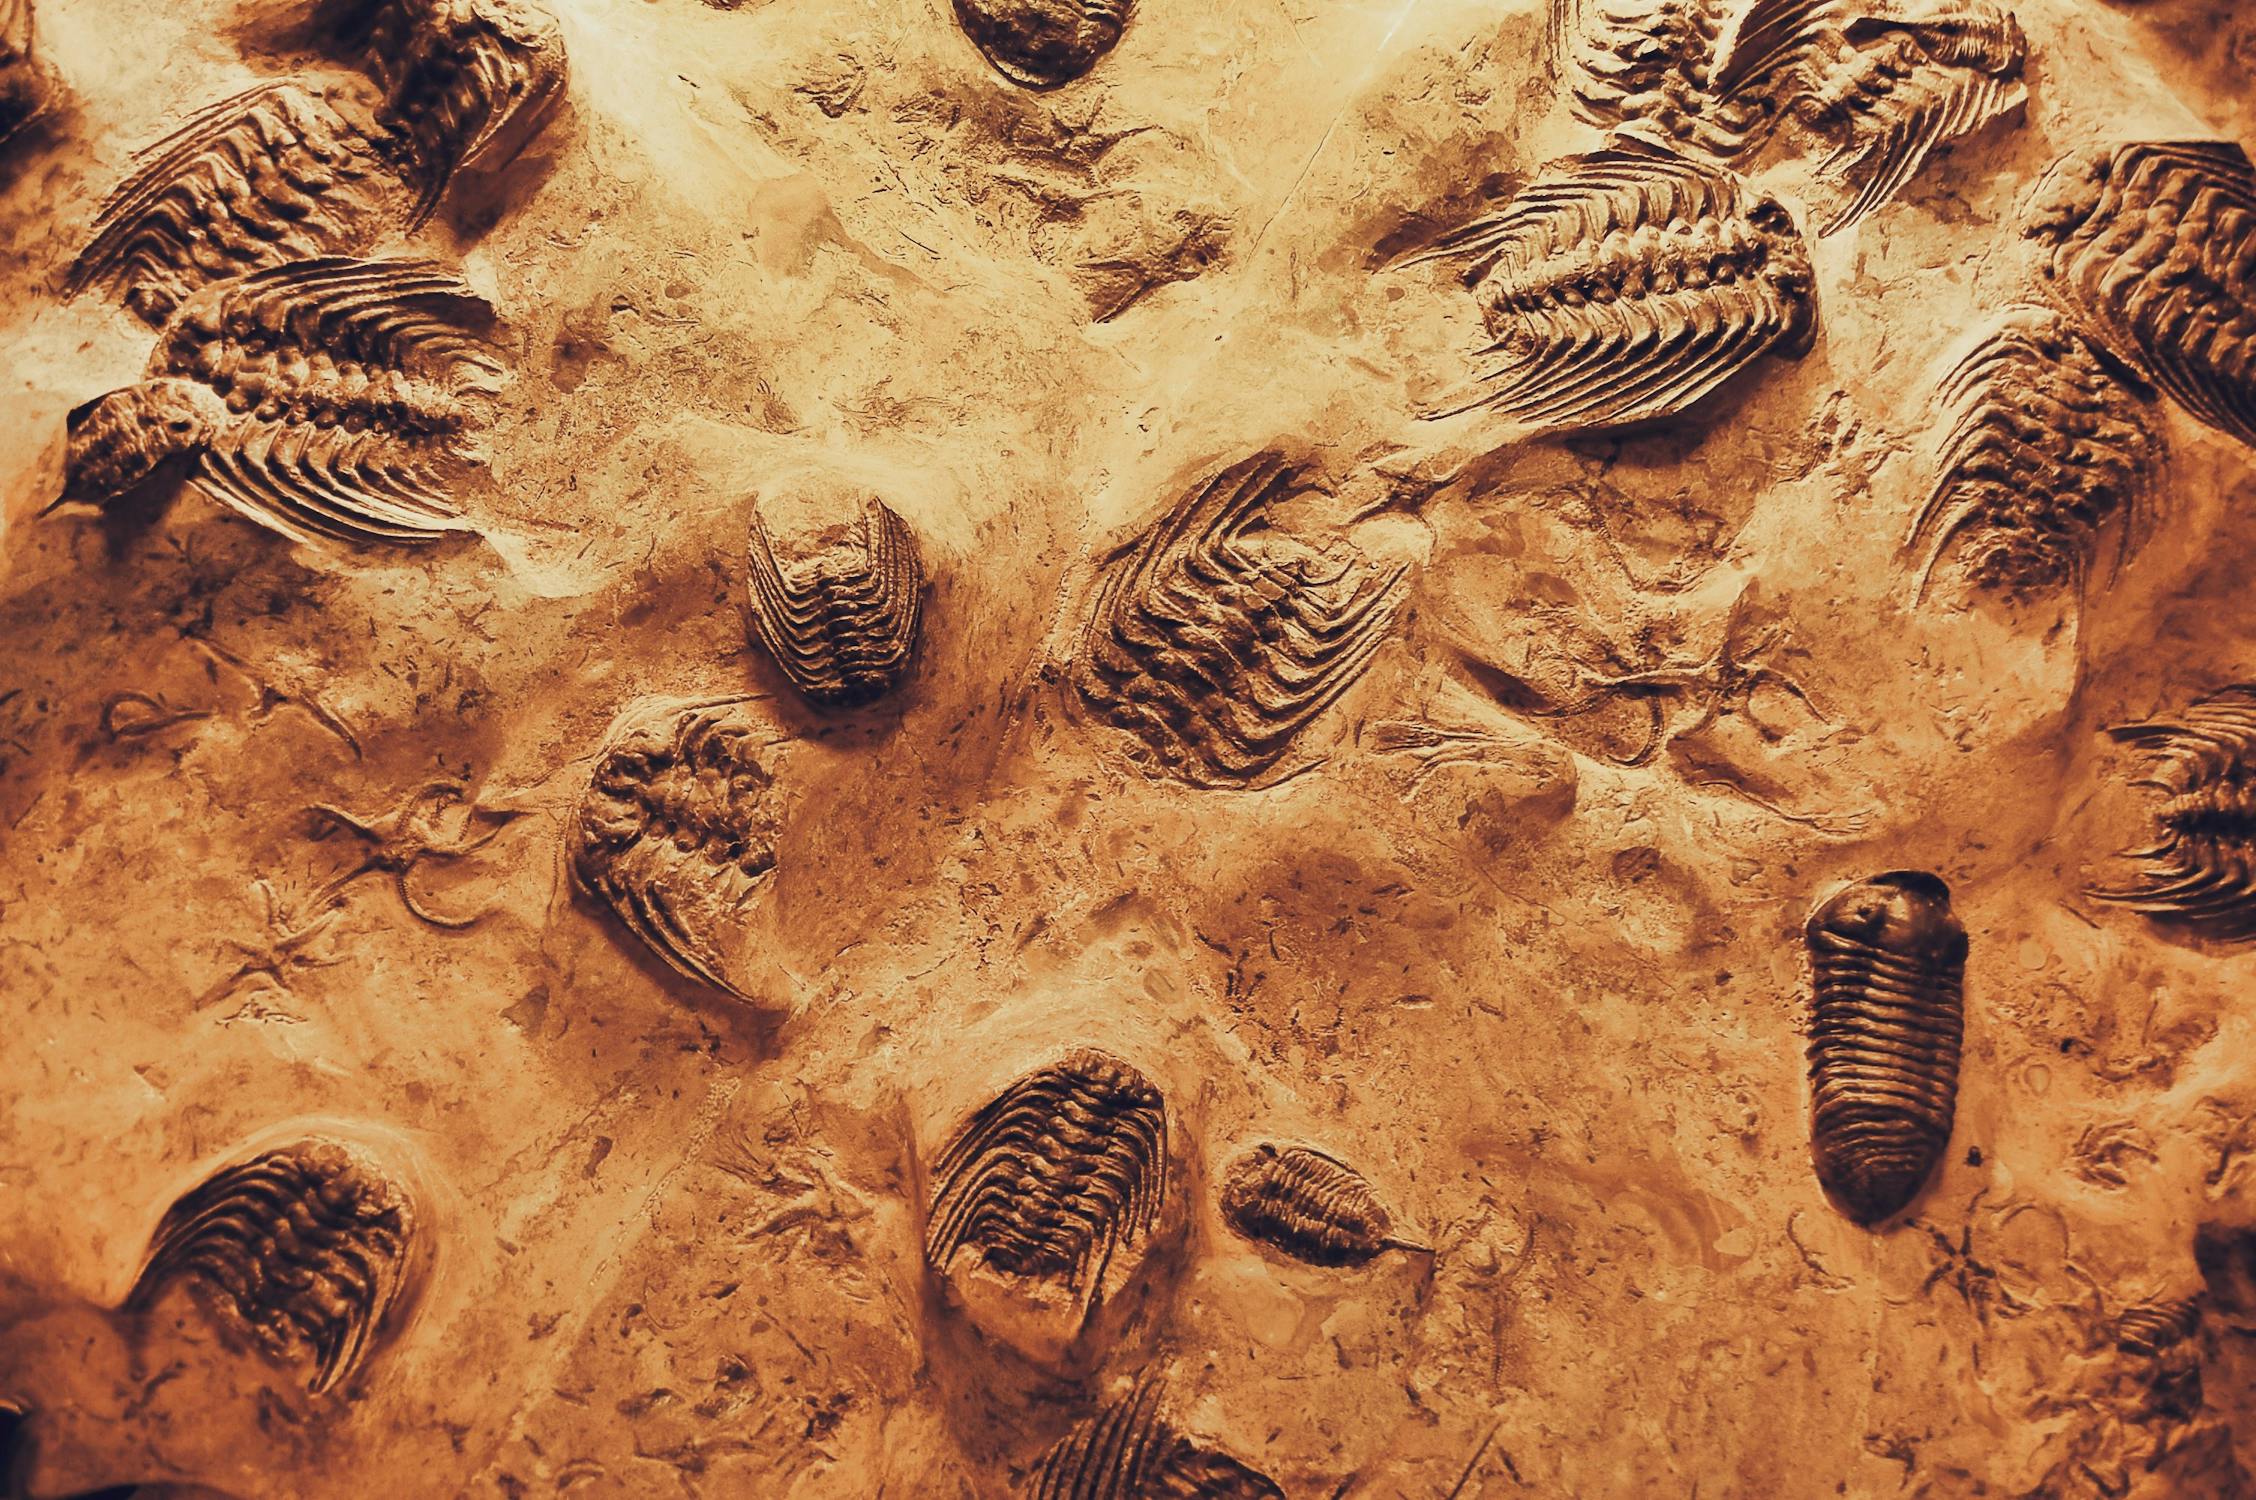  A fossilized rock slab containing multiple fossilized trilobites, which are a type of extinct marine arthropod related to modern-day horseshoe crabs and spiders.